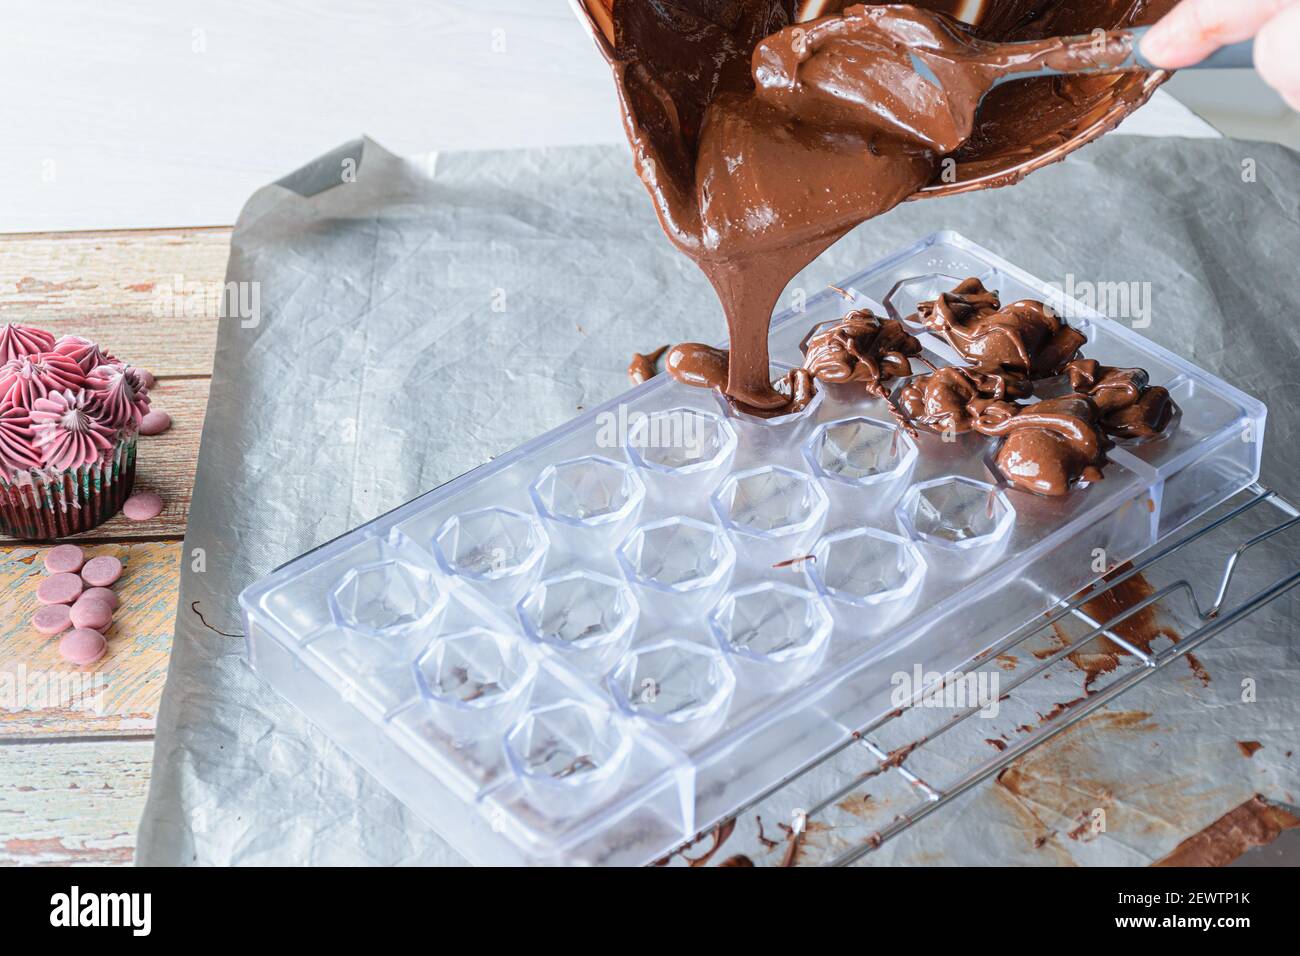 Closeup of confectioner pouring tempered chocolate in a polycarbonate form. Stock Photo